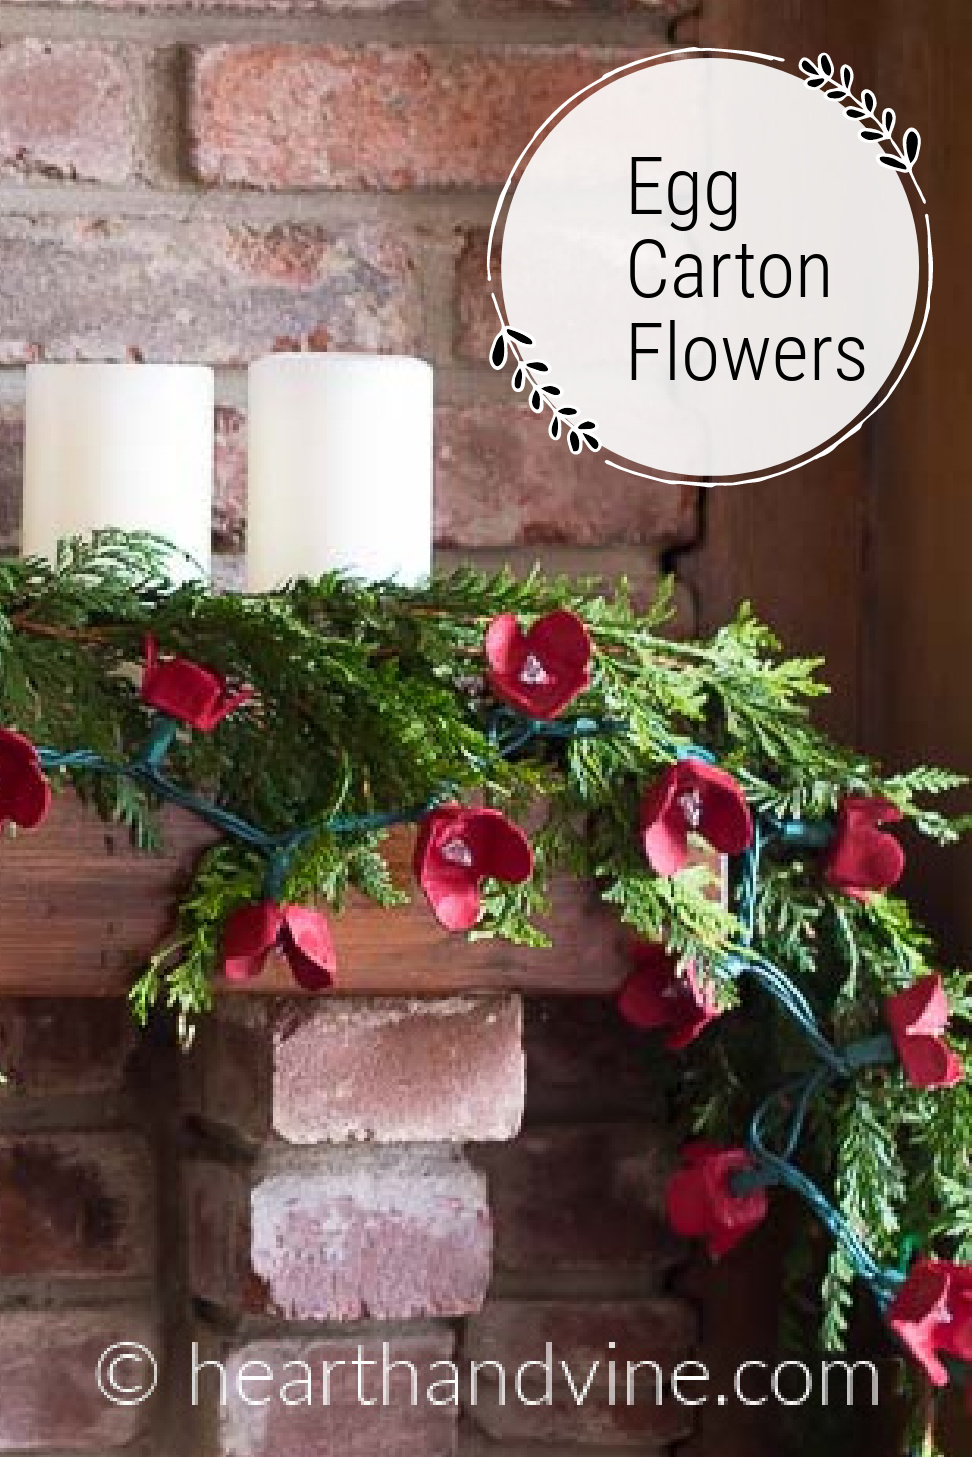 Egg carton flowers painted red and placed on lightbulbs from a string of lights as a garland for a mantel.